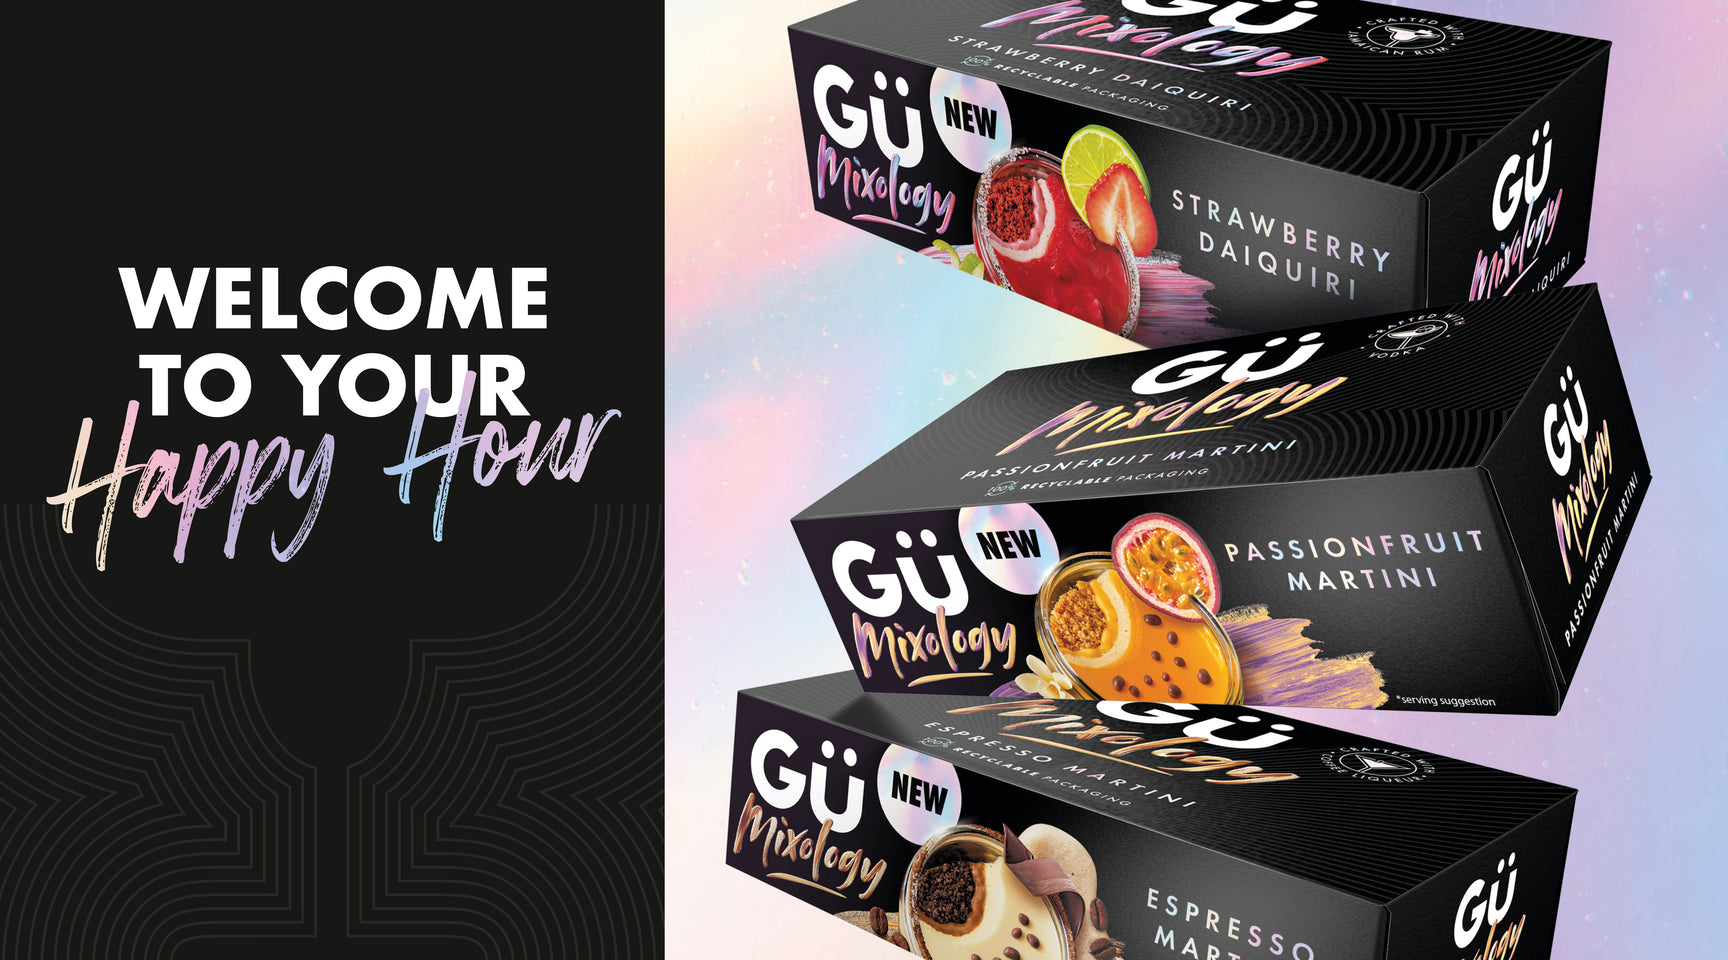 How to do Happy Hour at Home (Without the Hangover) with Gü Mixology Desserts